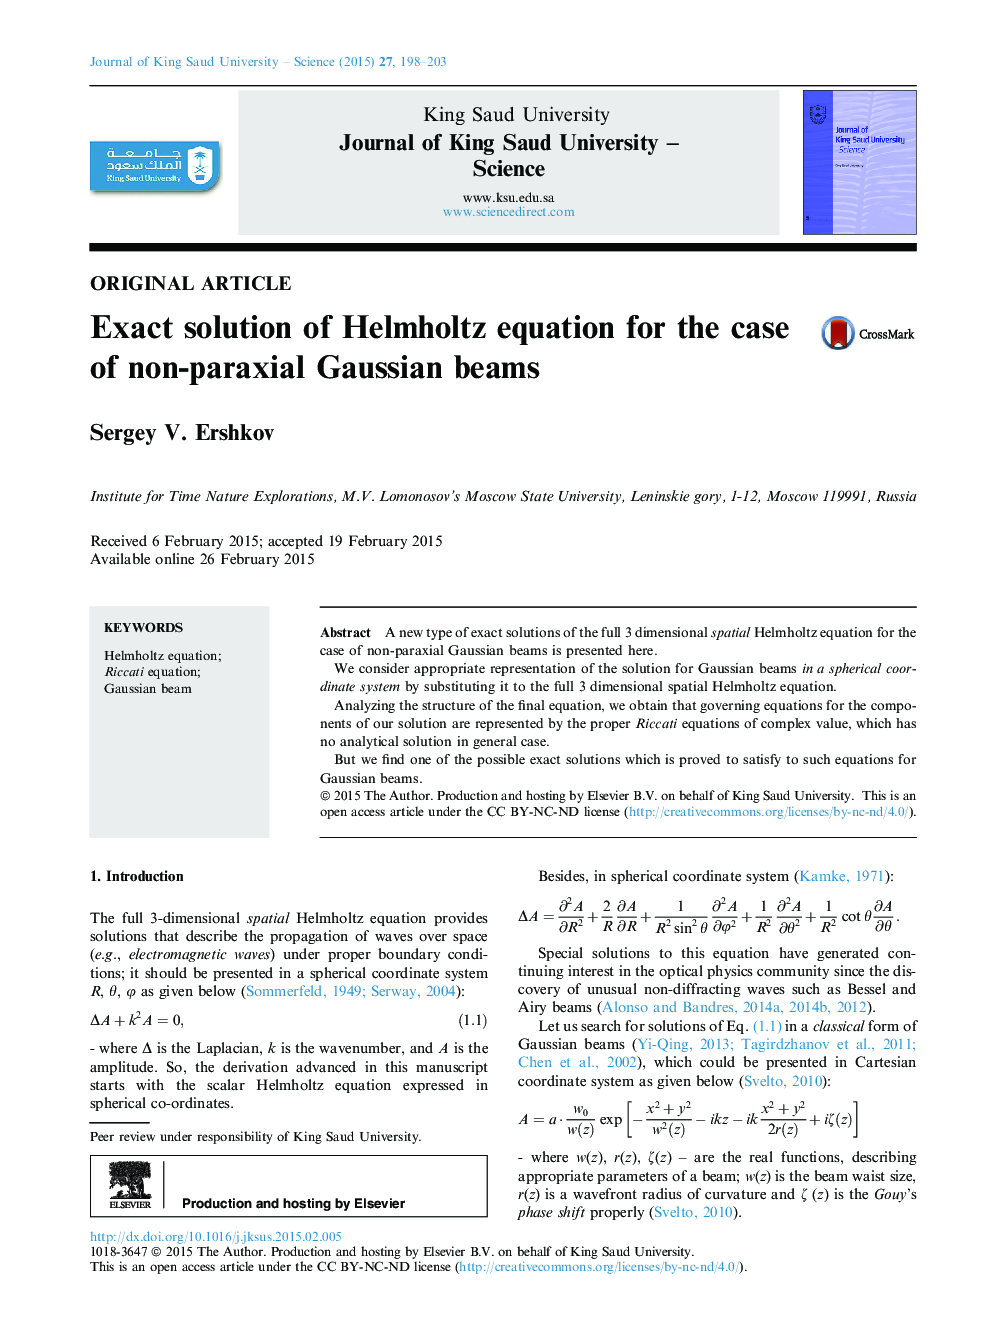 Exact solution of Helmholtz equation for the case of non-paraxial Gaussian beams 